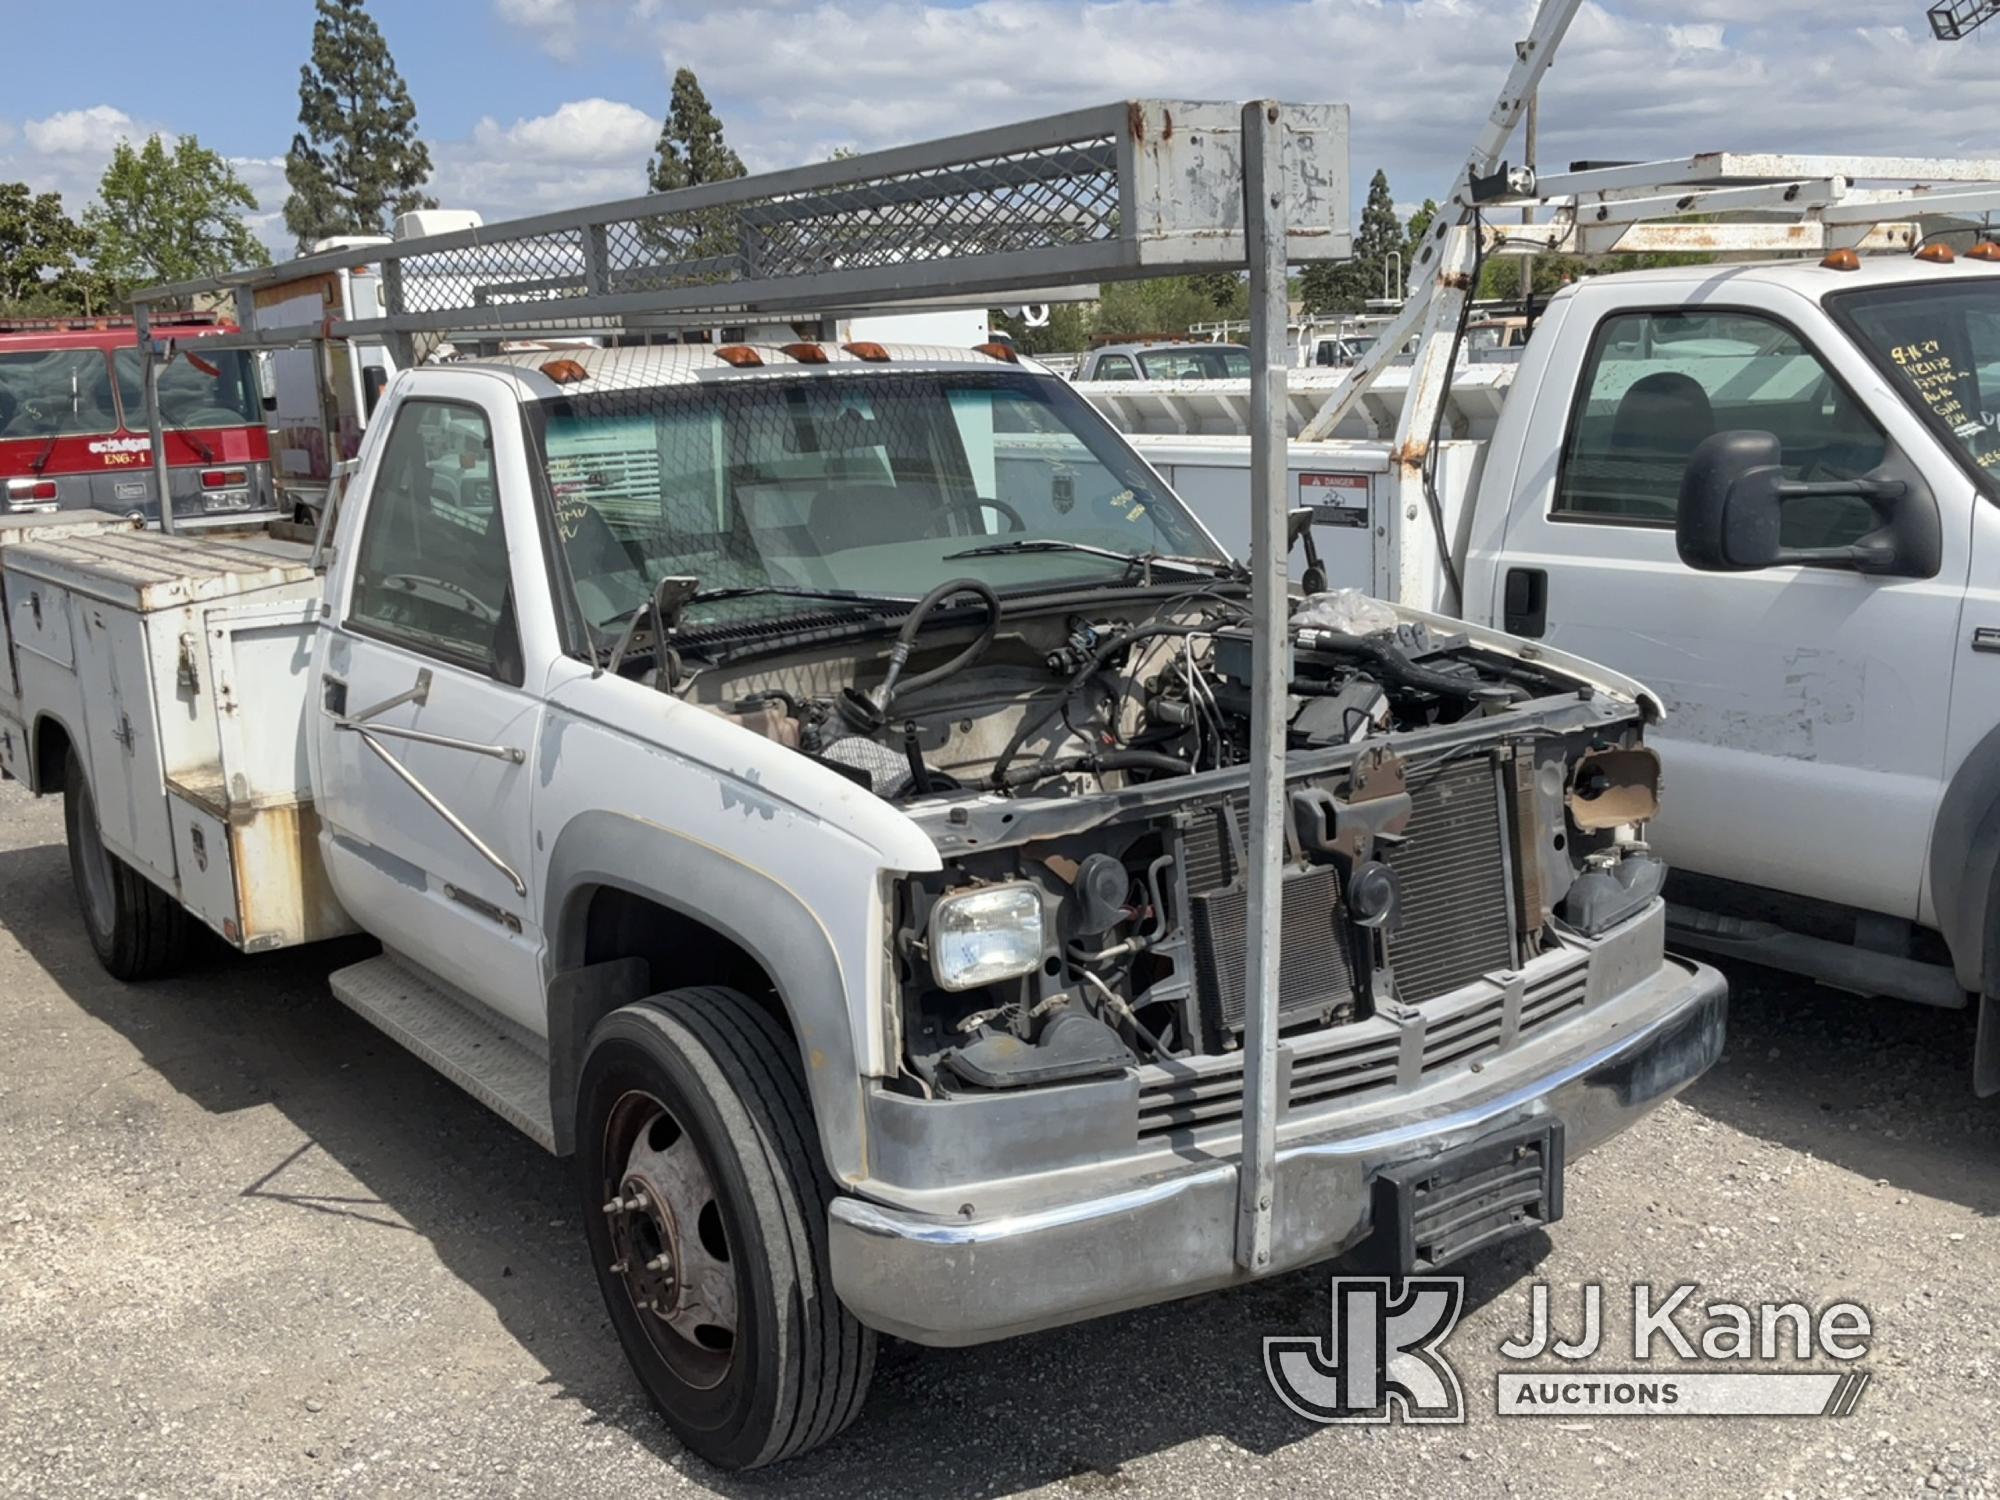 (Jurupa Valley, CA) 1998 Chevrolet C/K 3500 Cab & Chassis Not Running, No Key, Stripped Of Parts , M